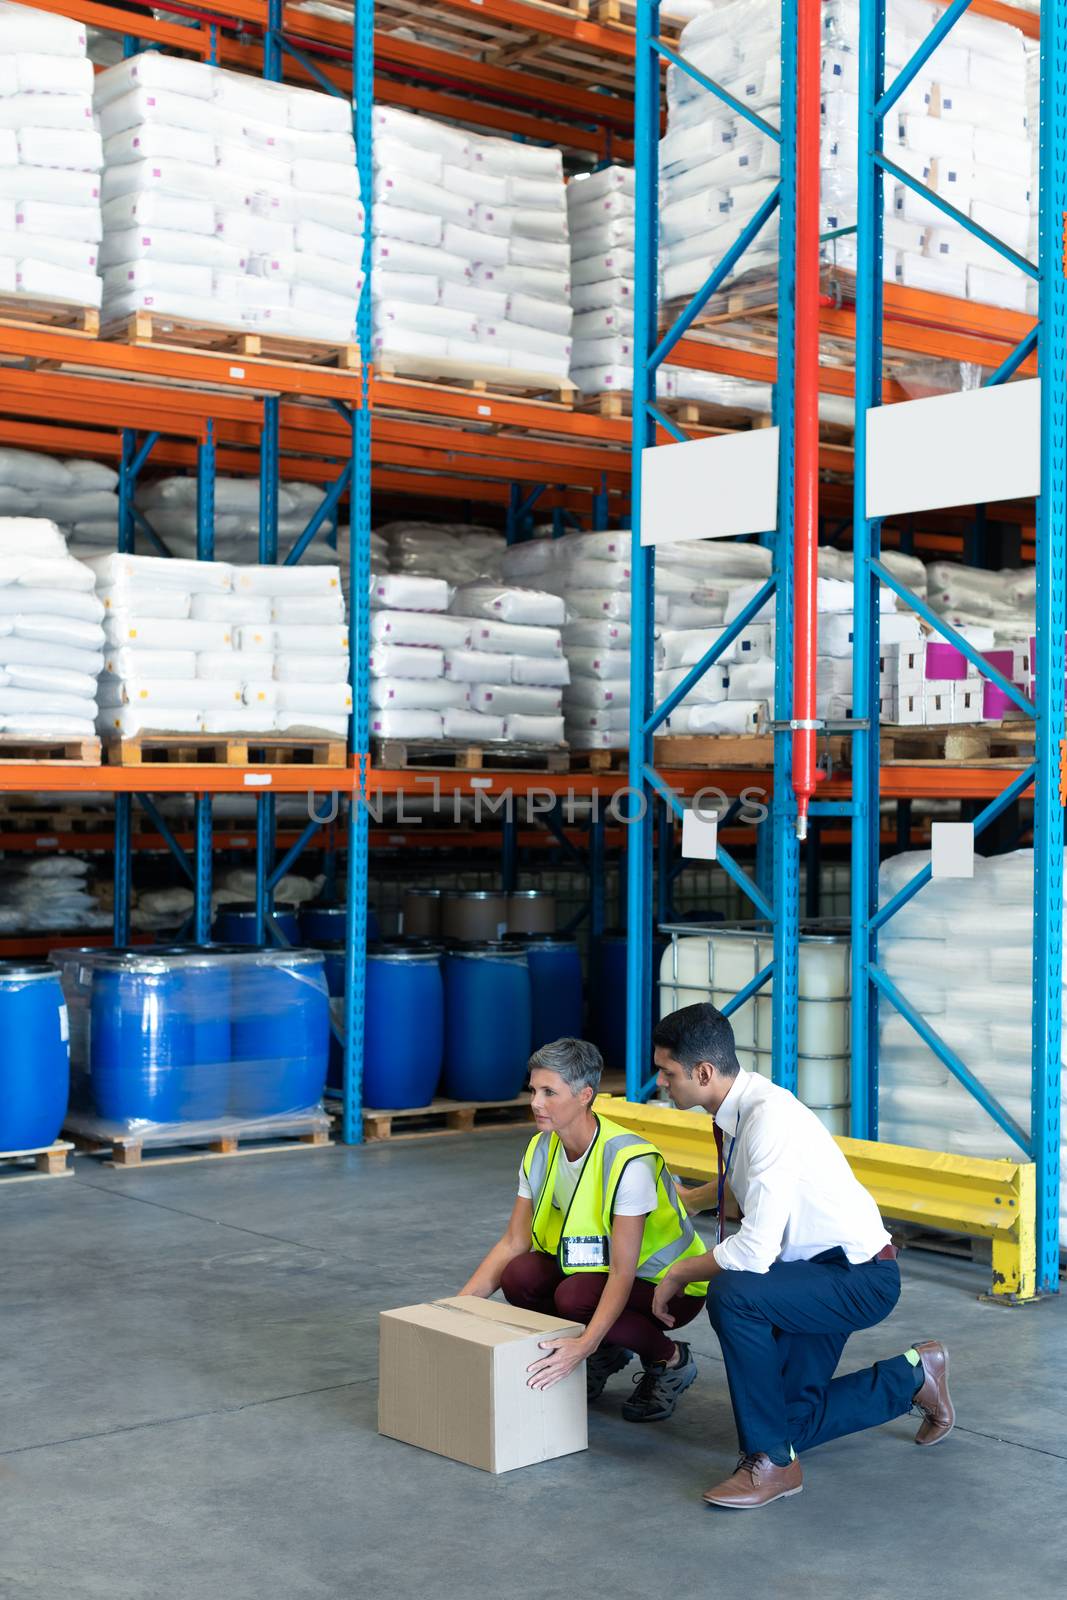 Side view of Caucasian Young male staff giving training to Caucasian female staff in warehouse. This is a freight transportation and distribution warehouse. Industrial and industrial workers concept